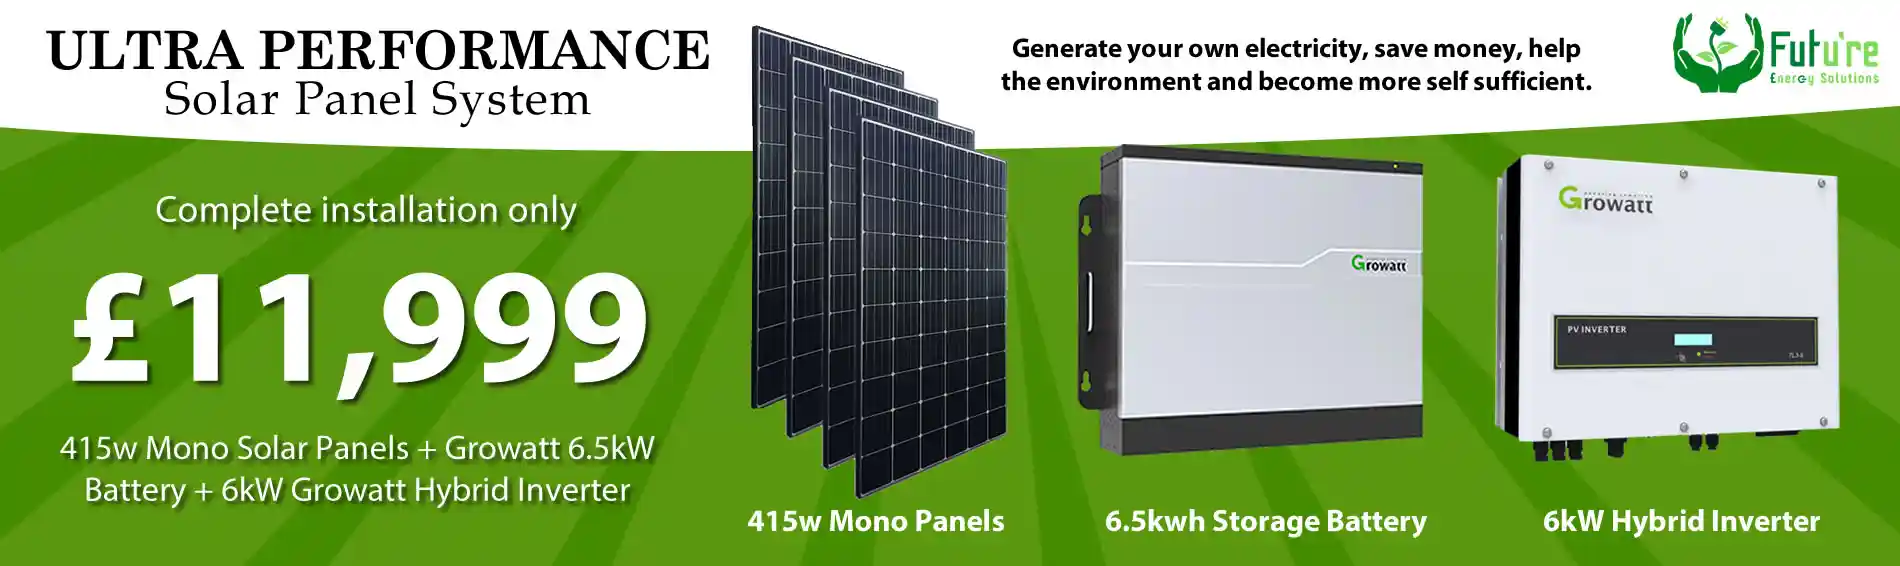 solar panel system offer by Future Energy Solutions